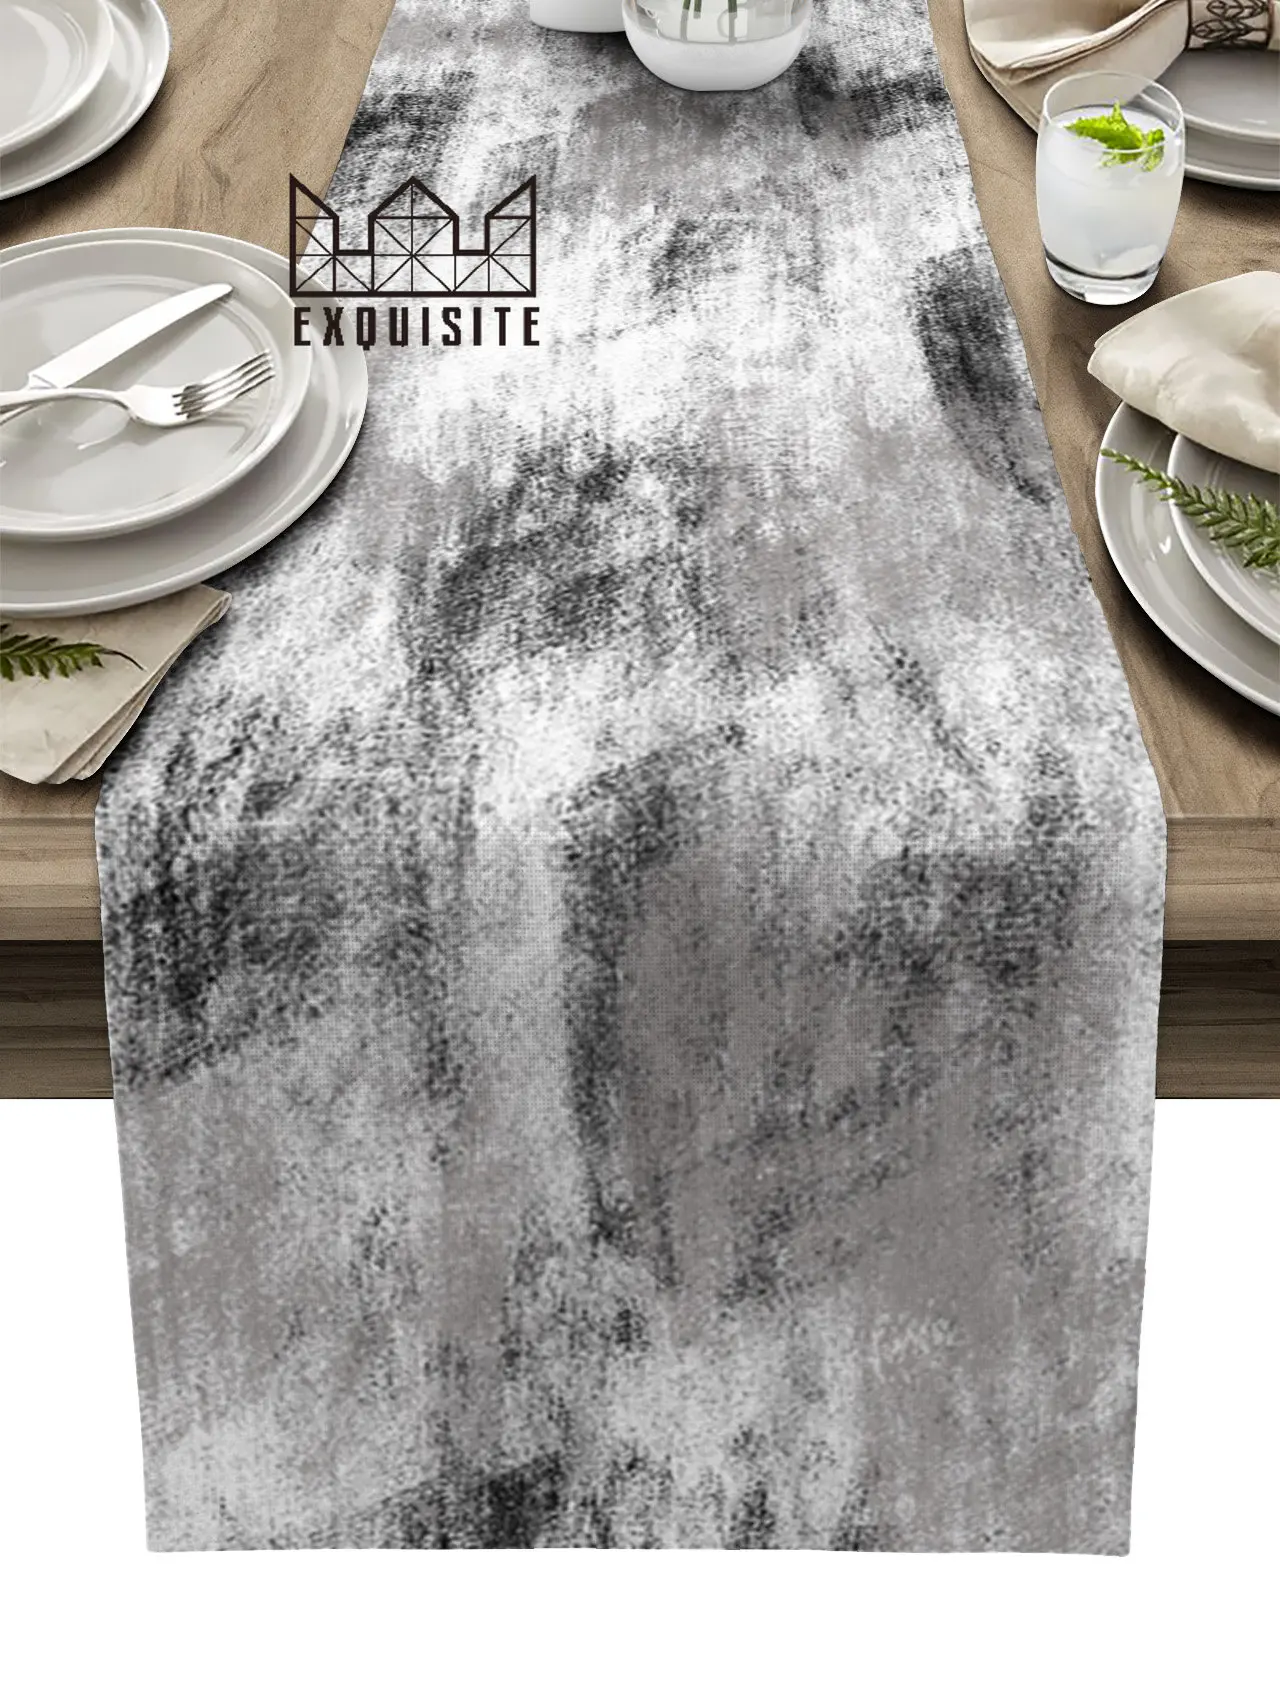 

Abstract Modern Vintage Texture Black And White Table Runner Wedding Dining Table Cover Cloth Placemat Napkin Home Kitchen Decor